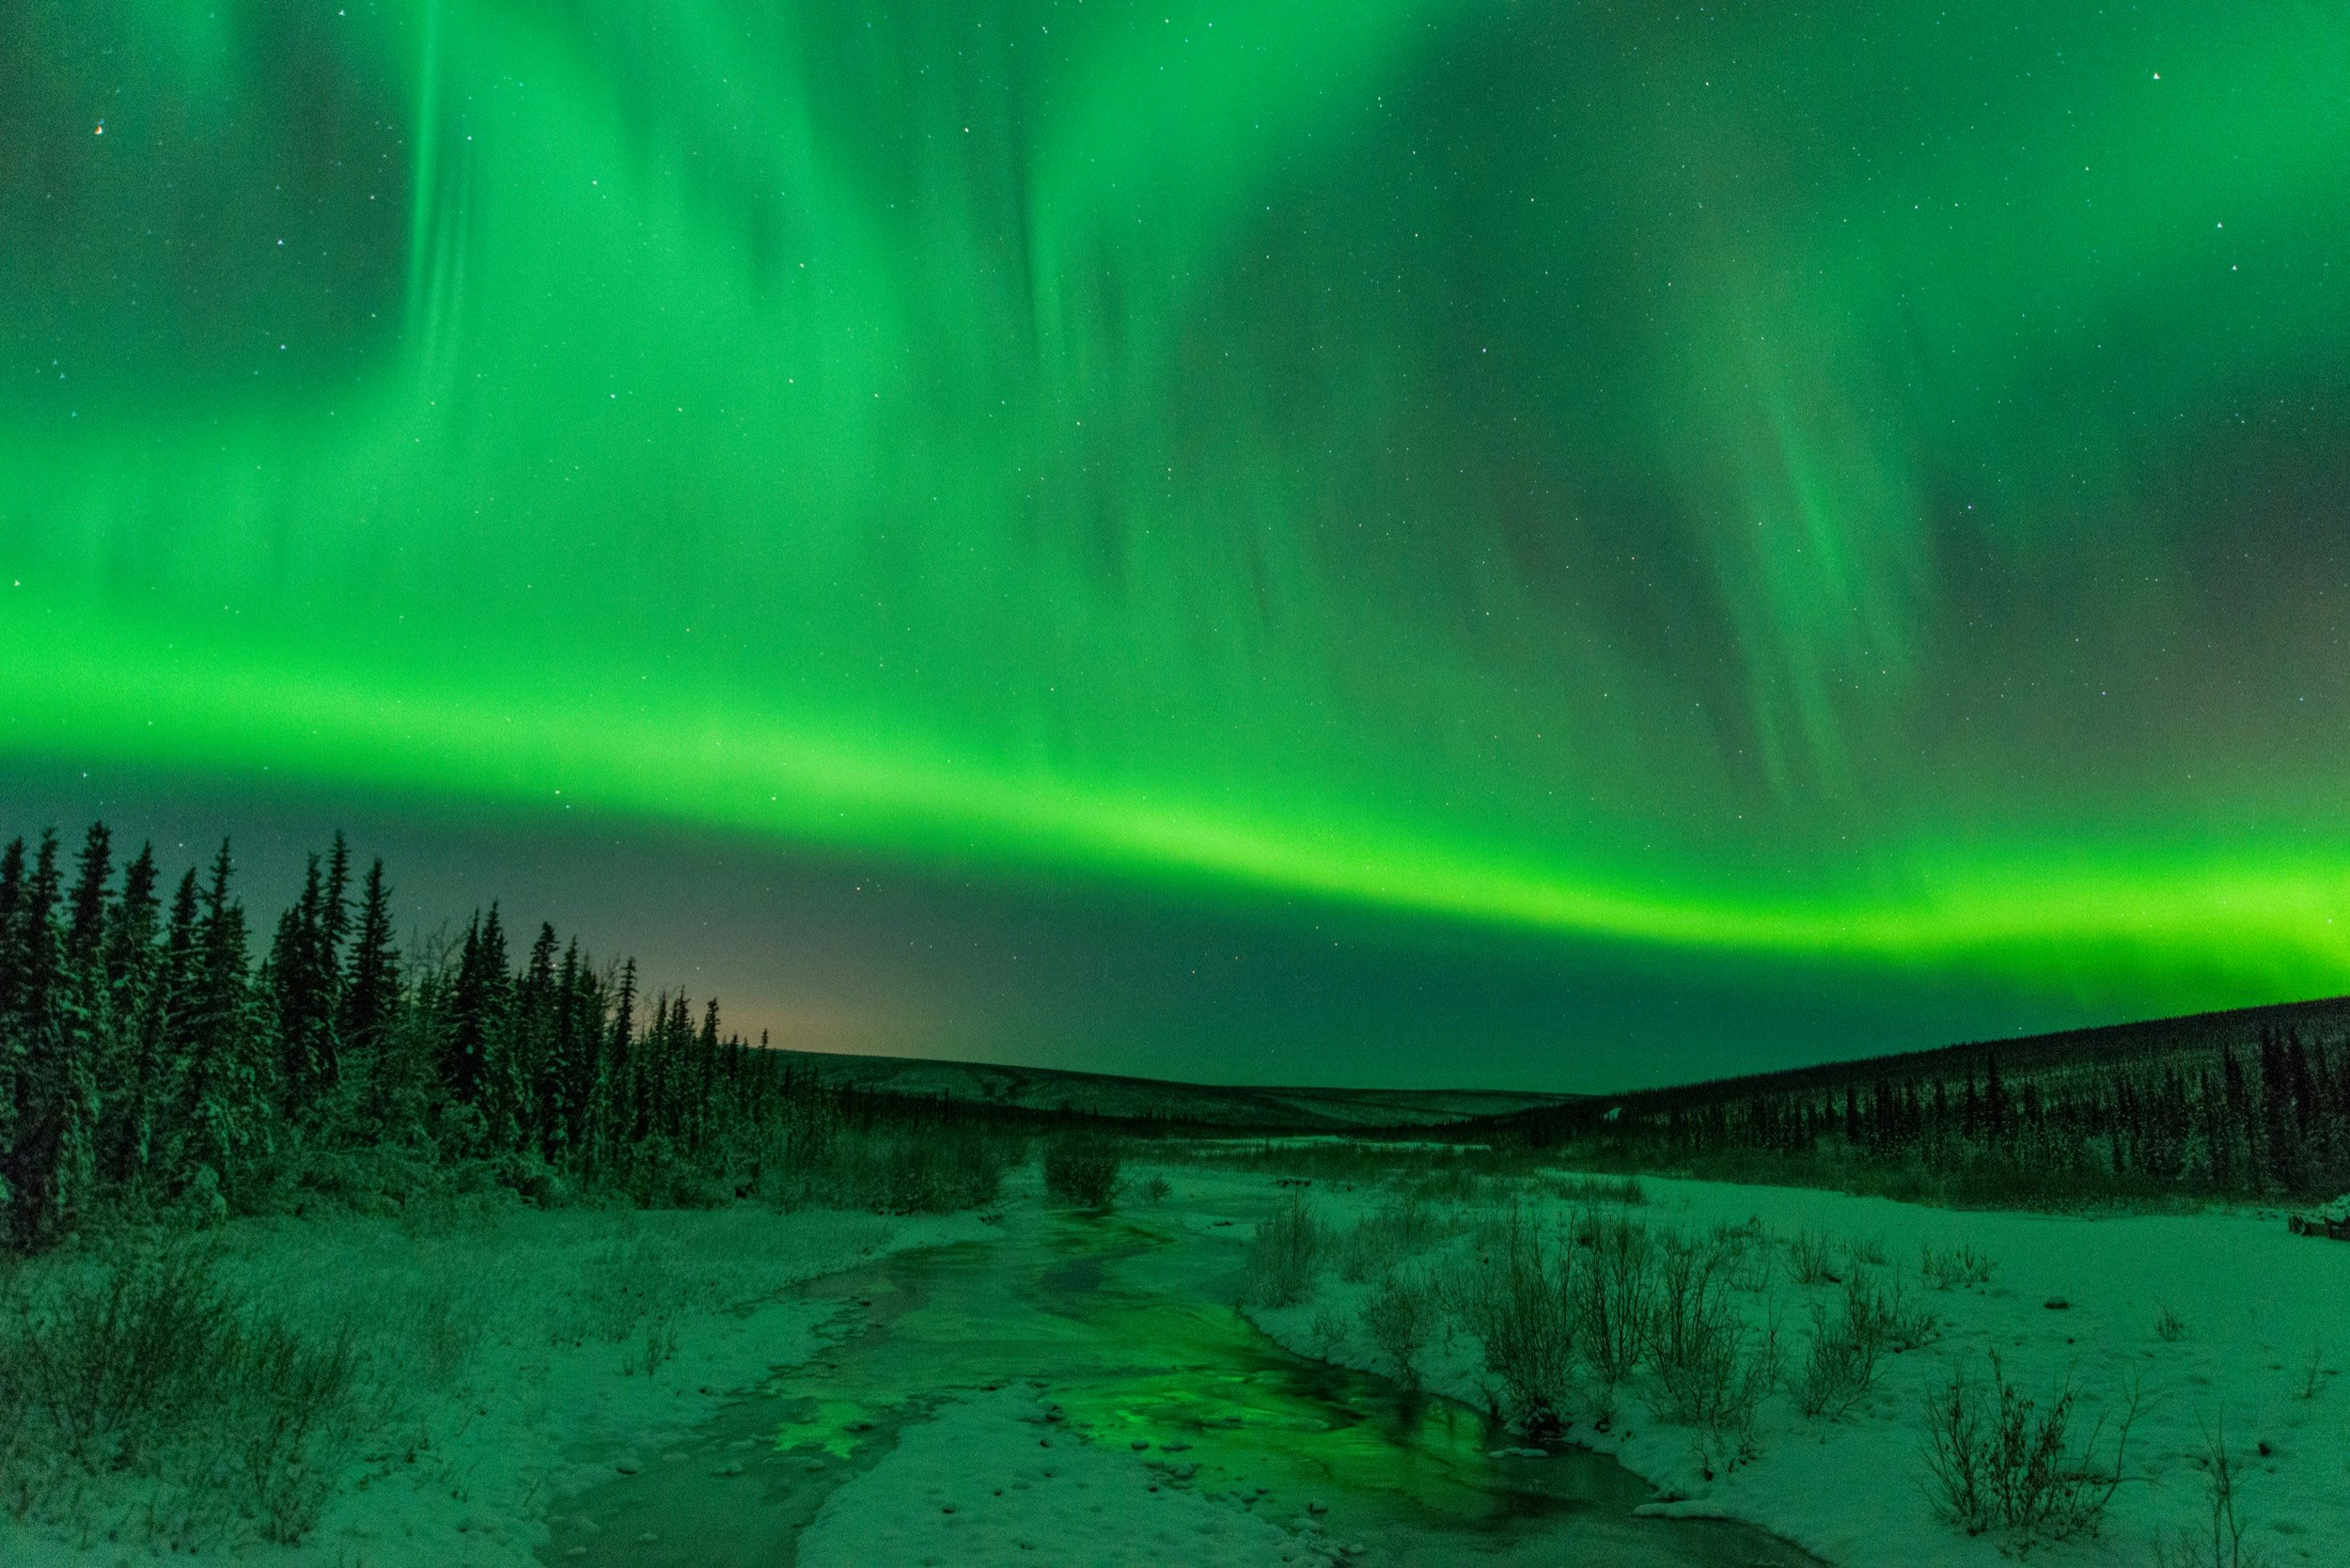 The Aurora Borealis, or Northern Lights, are seen in the sky near Fairbanks